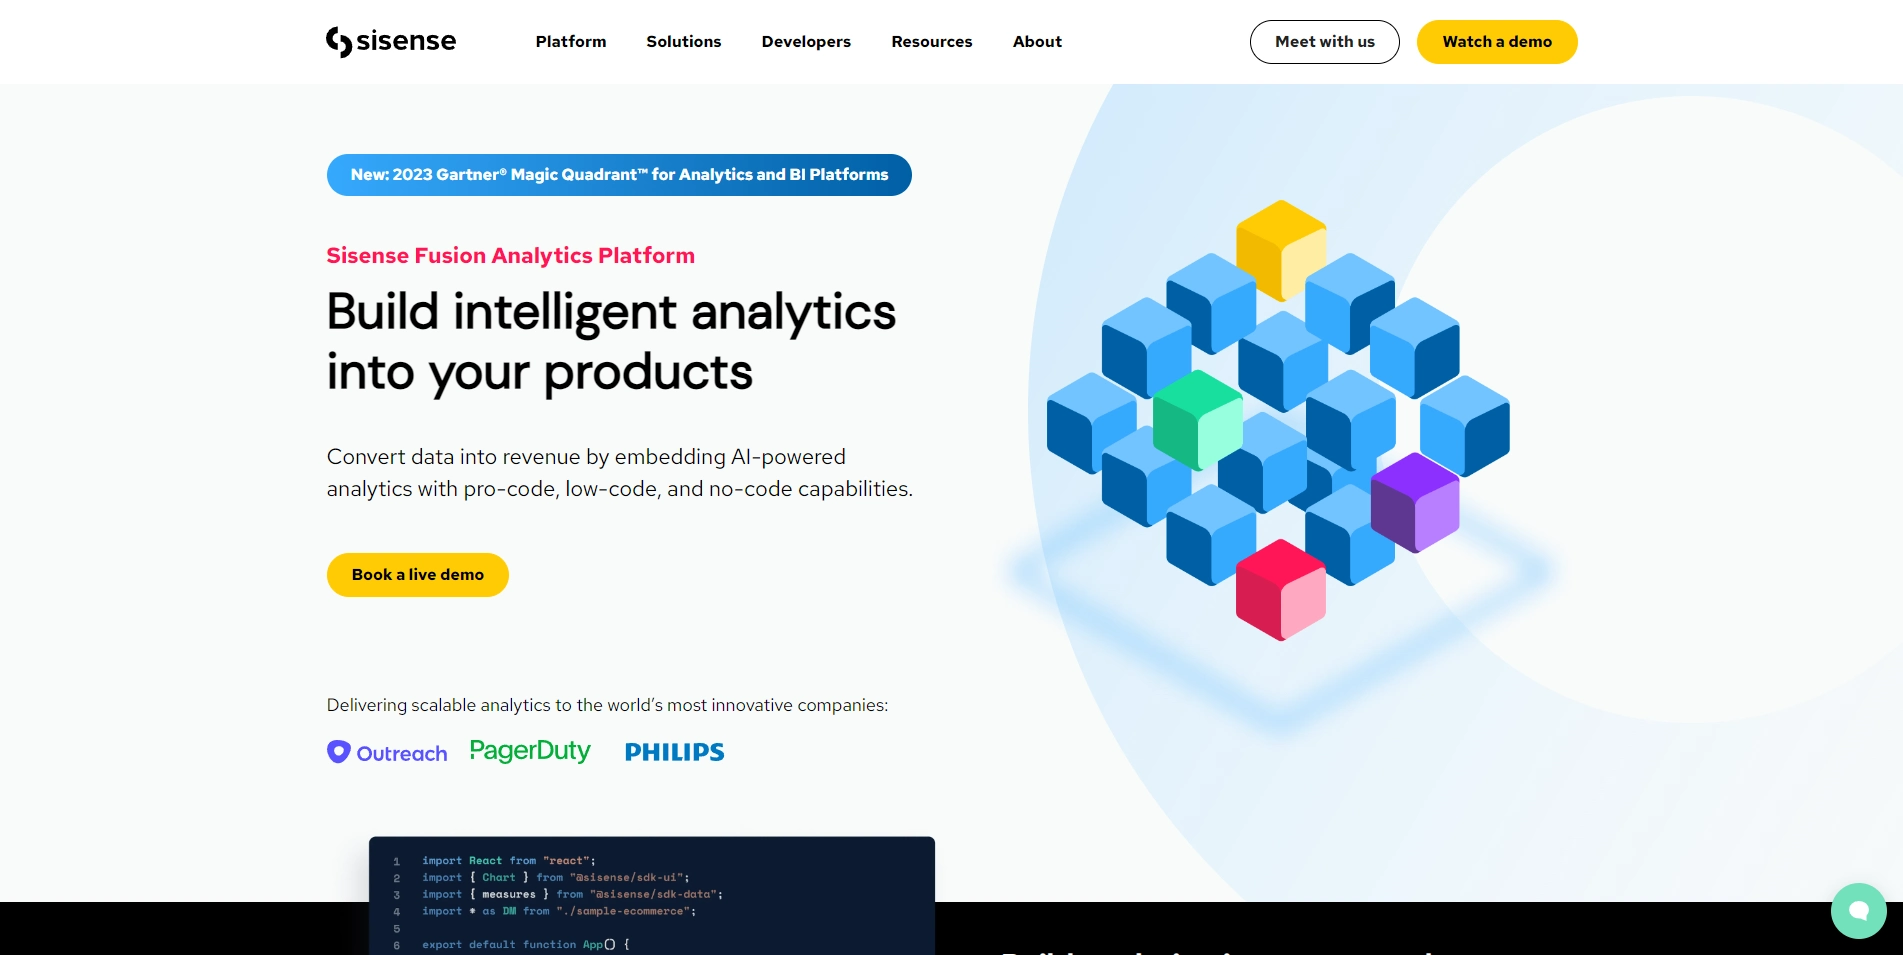 Sisense business intelligence and analytics software's landing page.